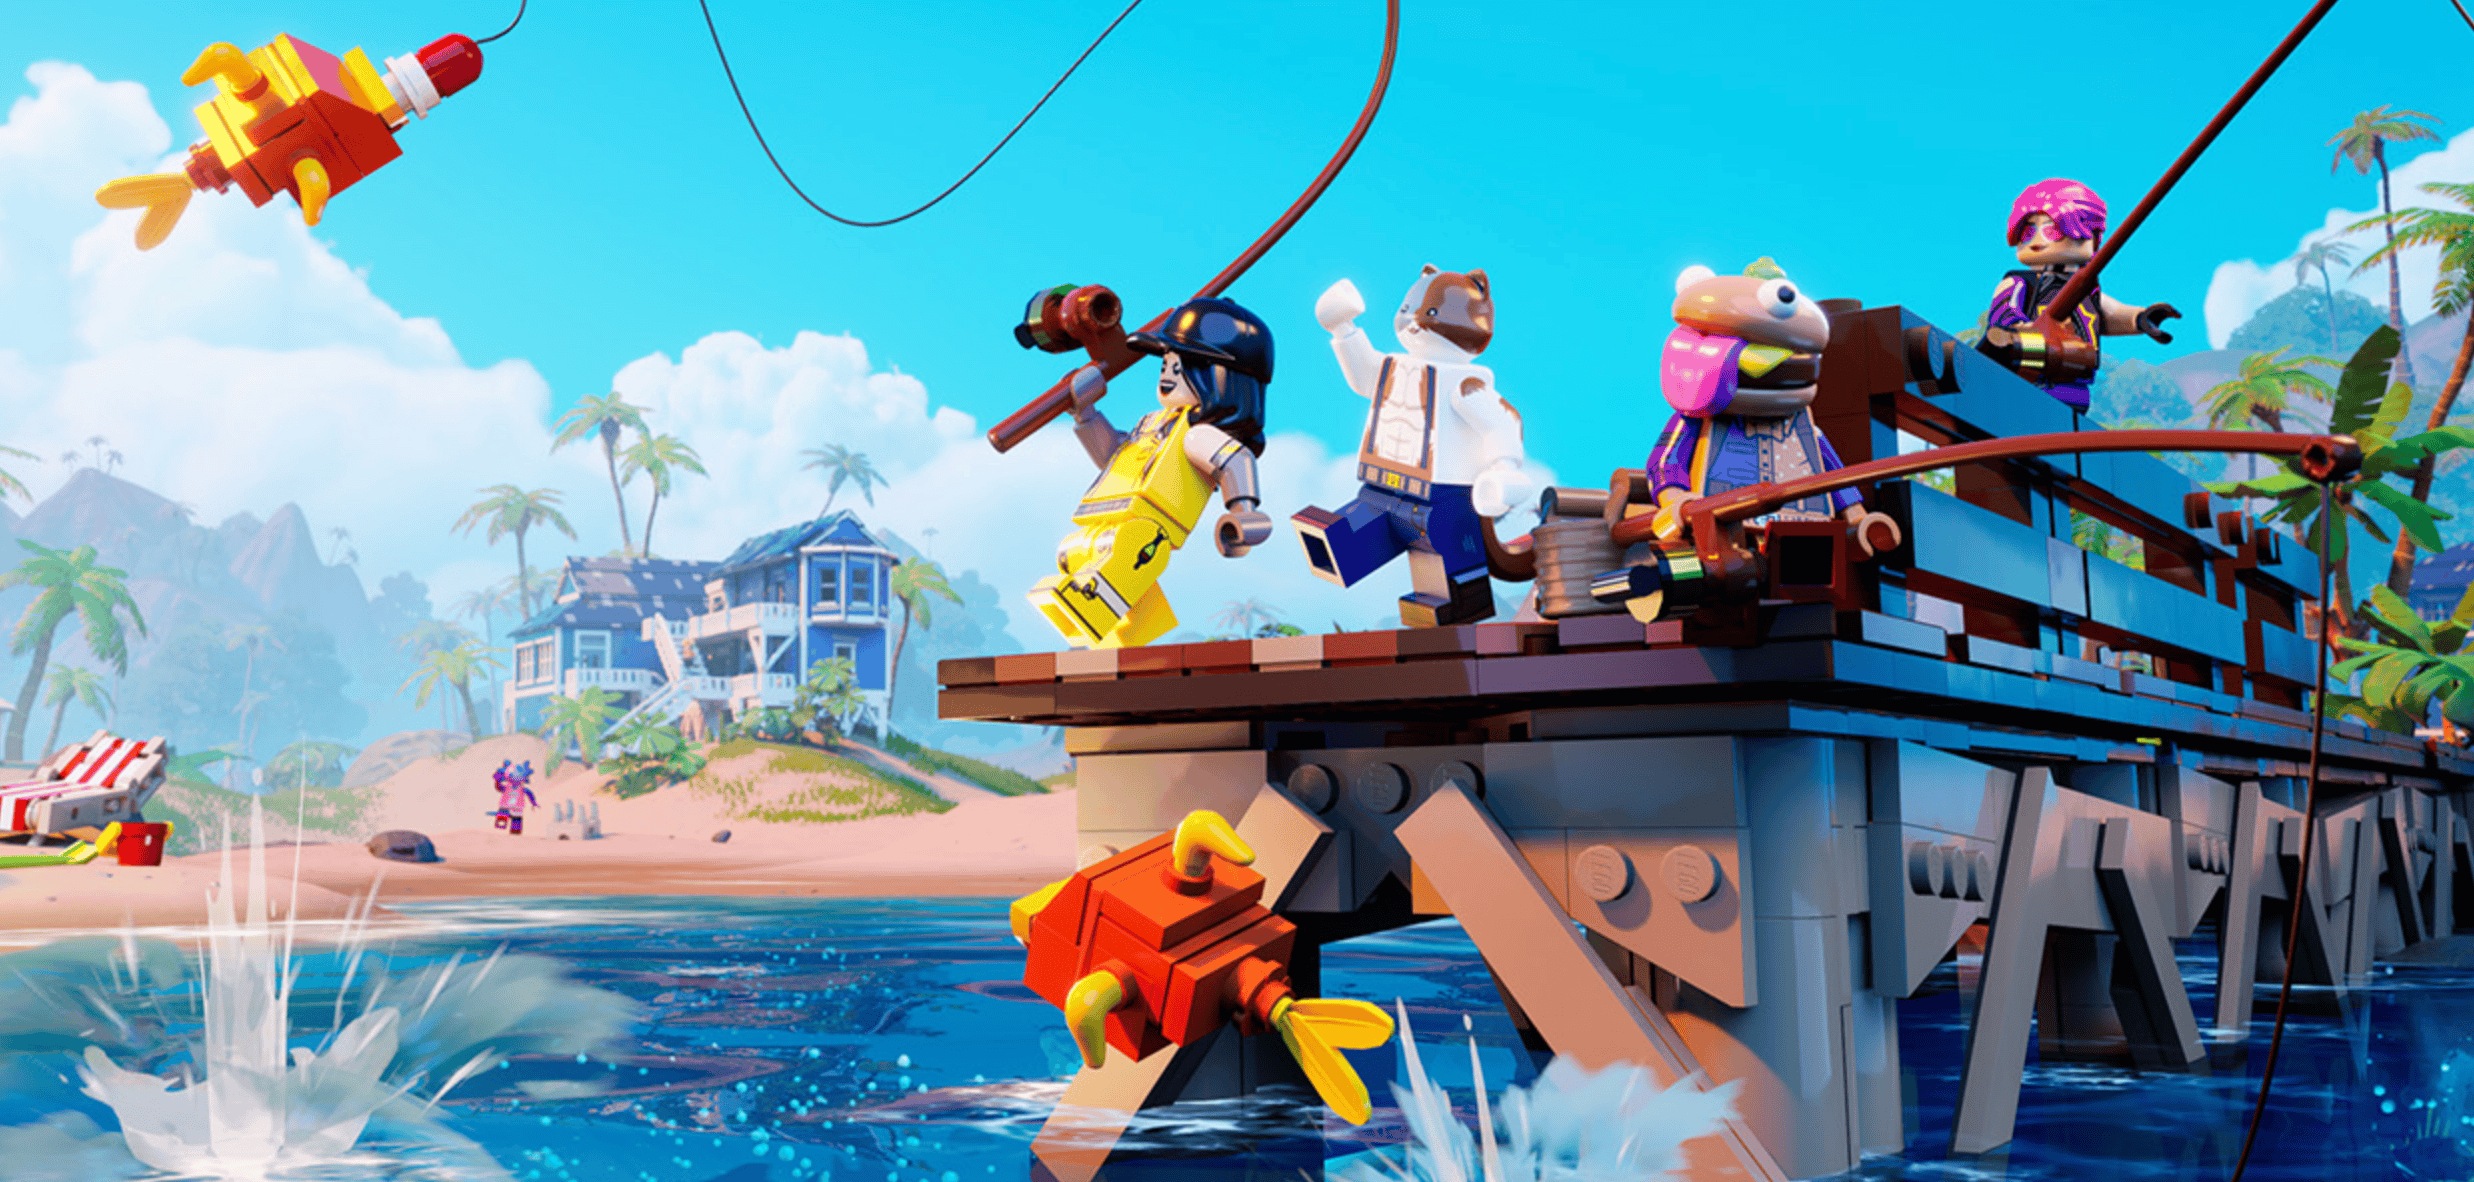 Some Fortnite Lego characters fishing off a pier